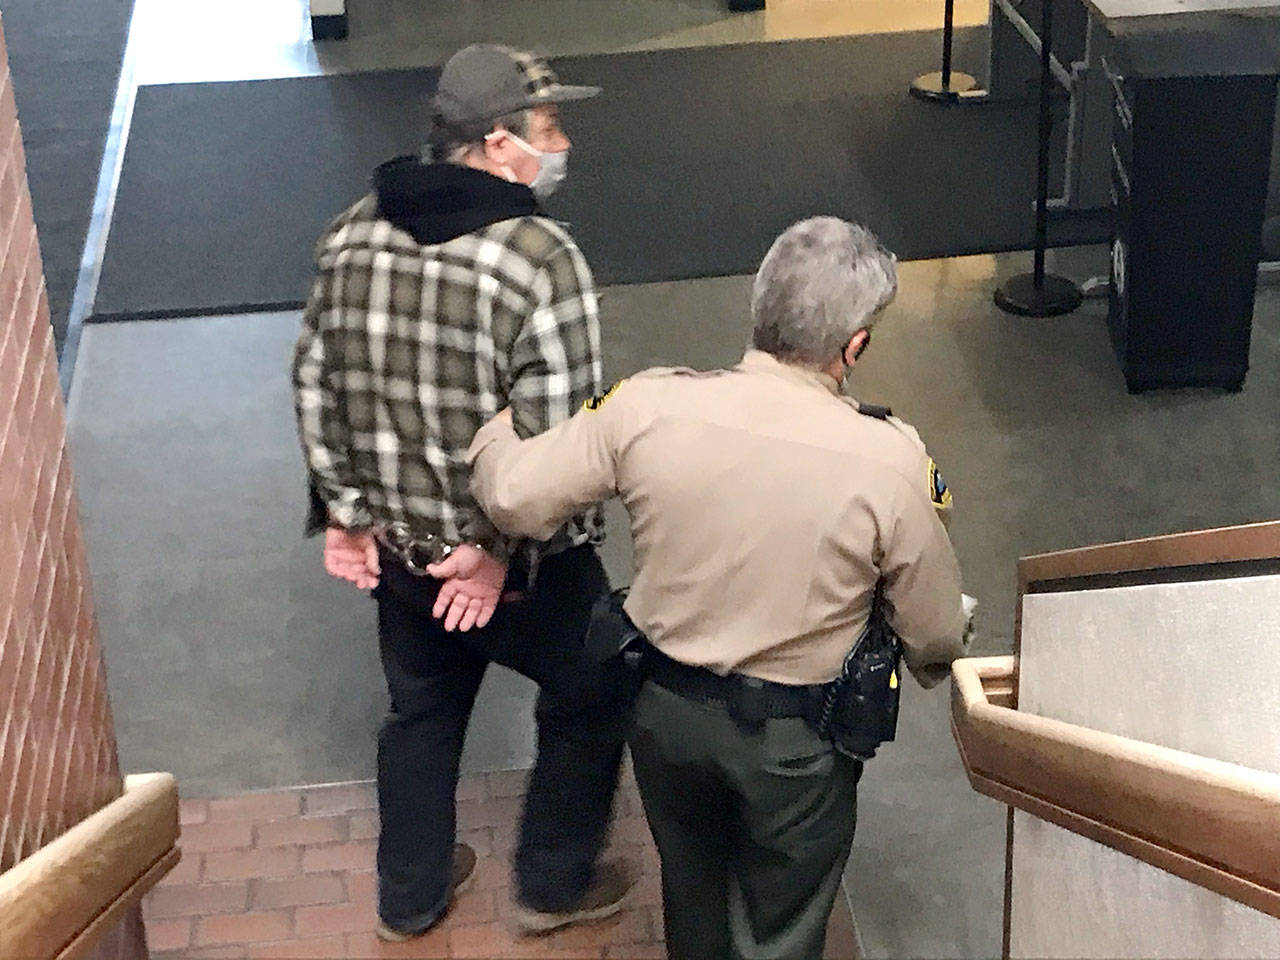 David Allen of Forks is led away to the Clallam County jail Wednesday to await sentencing after pleading guilty to two counts of child rape. (Paul Gottlieb/Peninsula Daily News)